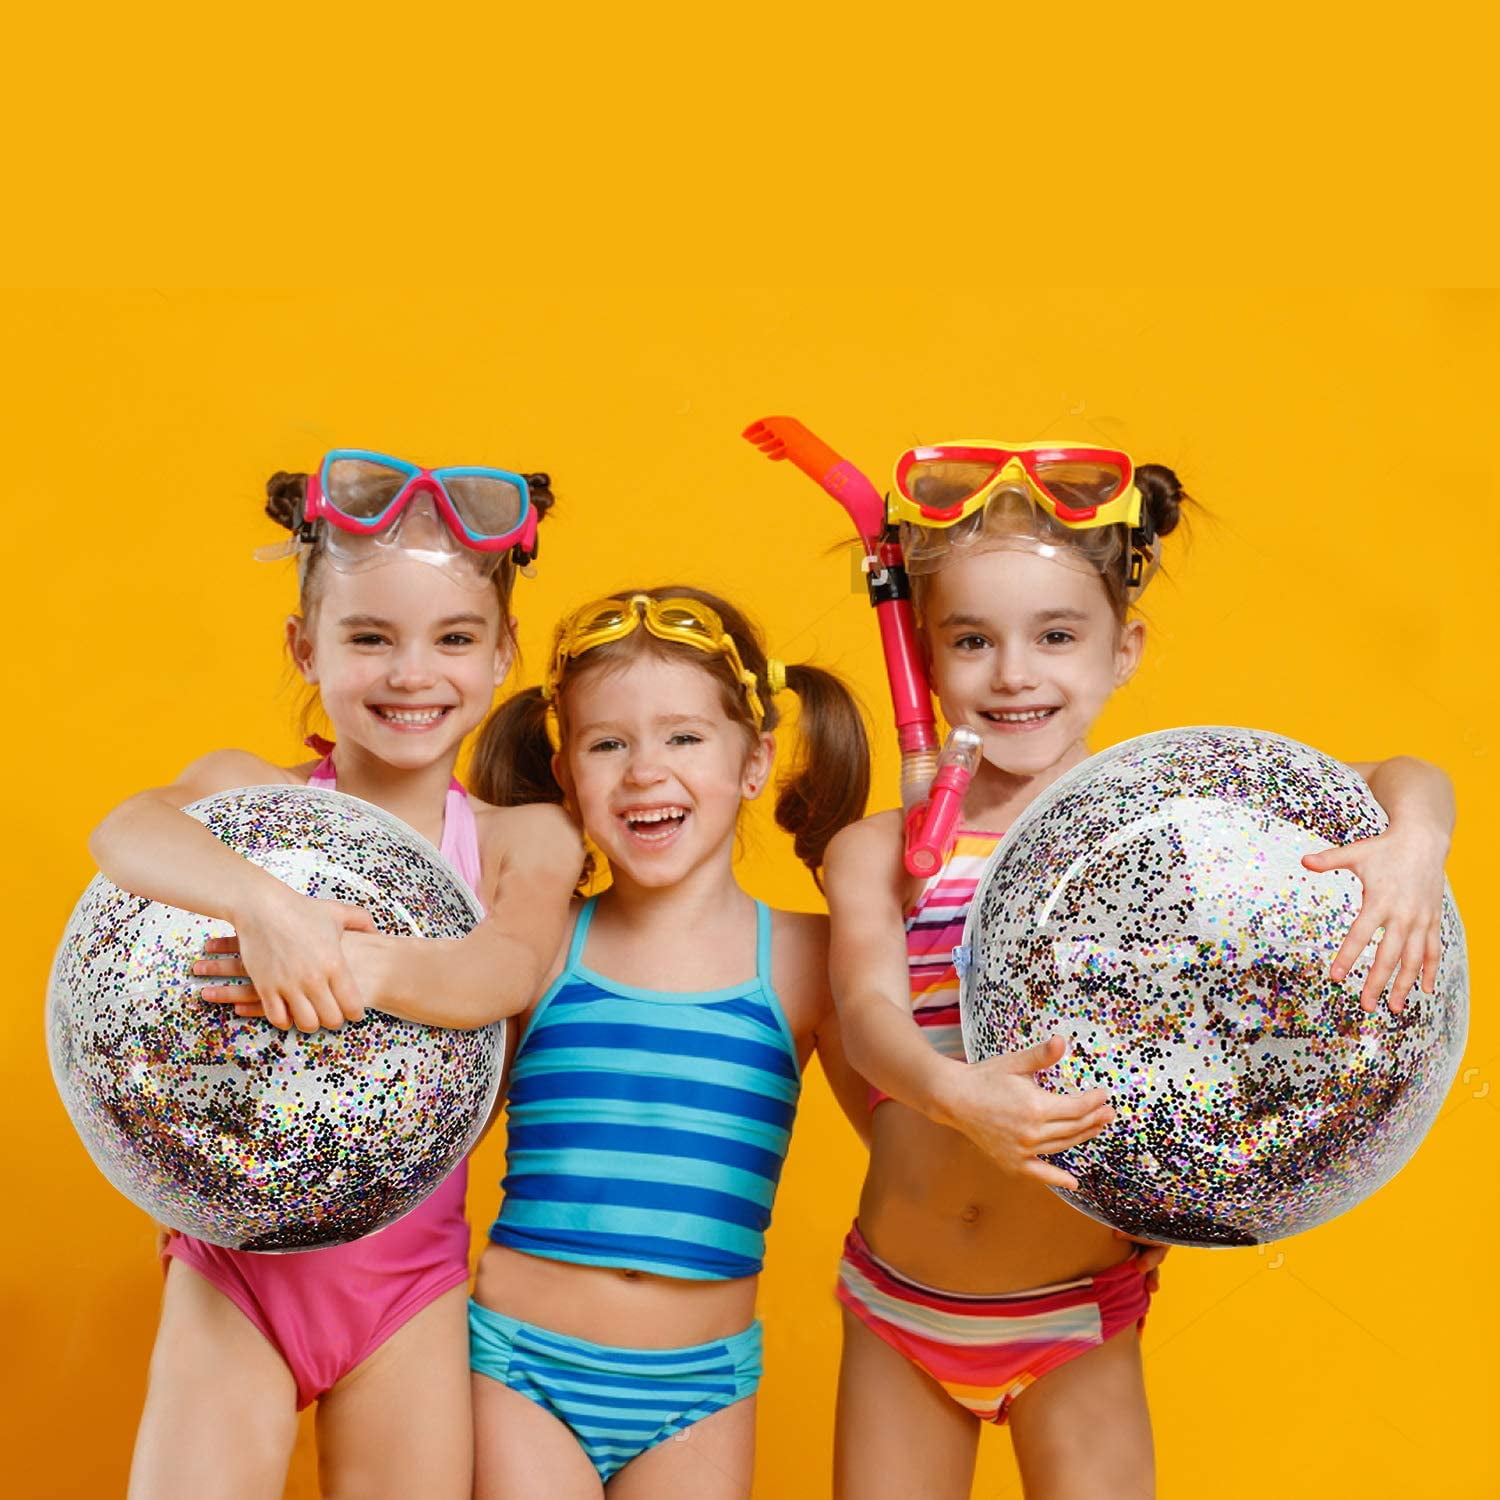 Details about   16 Inch Sequin Beach Ball Glitter Beach Ball Inflatable Kids Swim Pool Ball Toy 